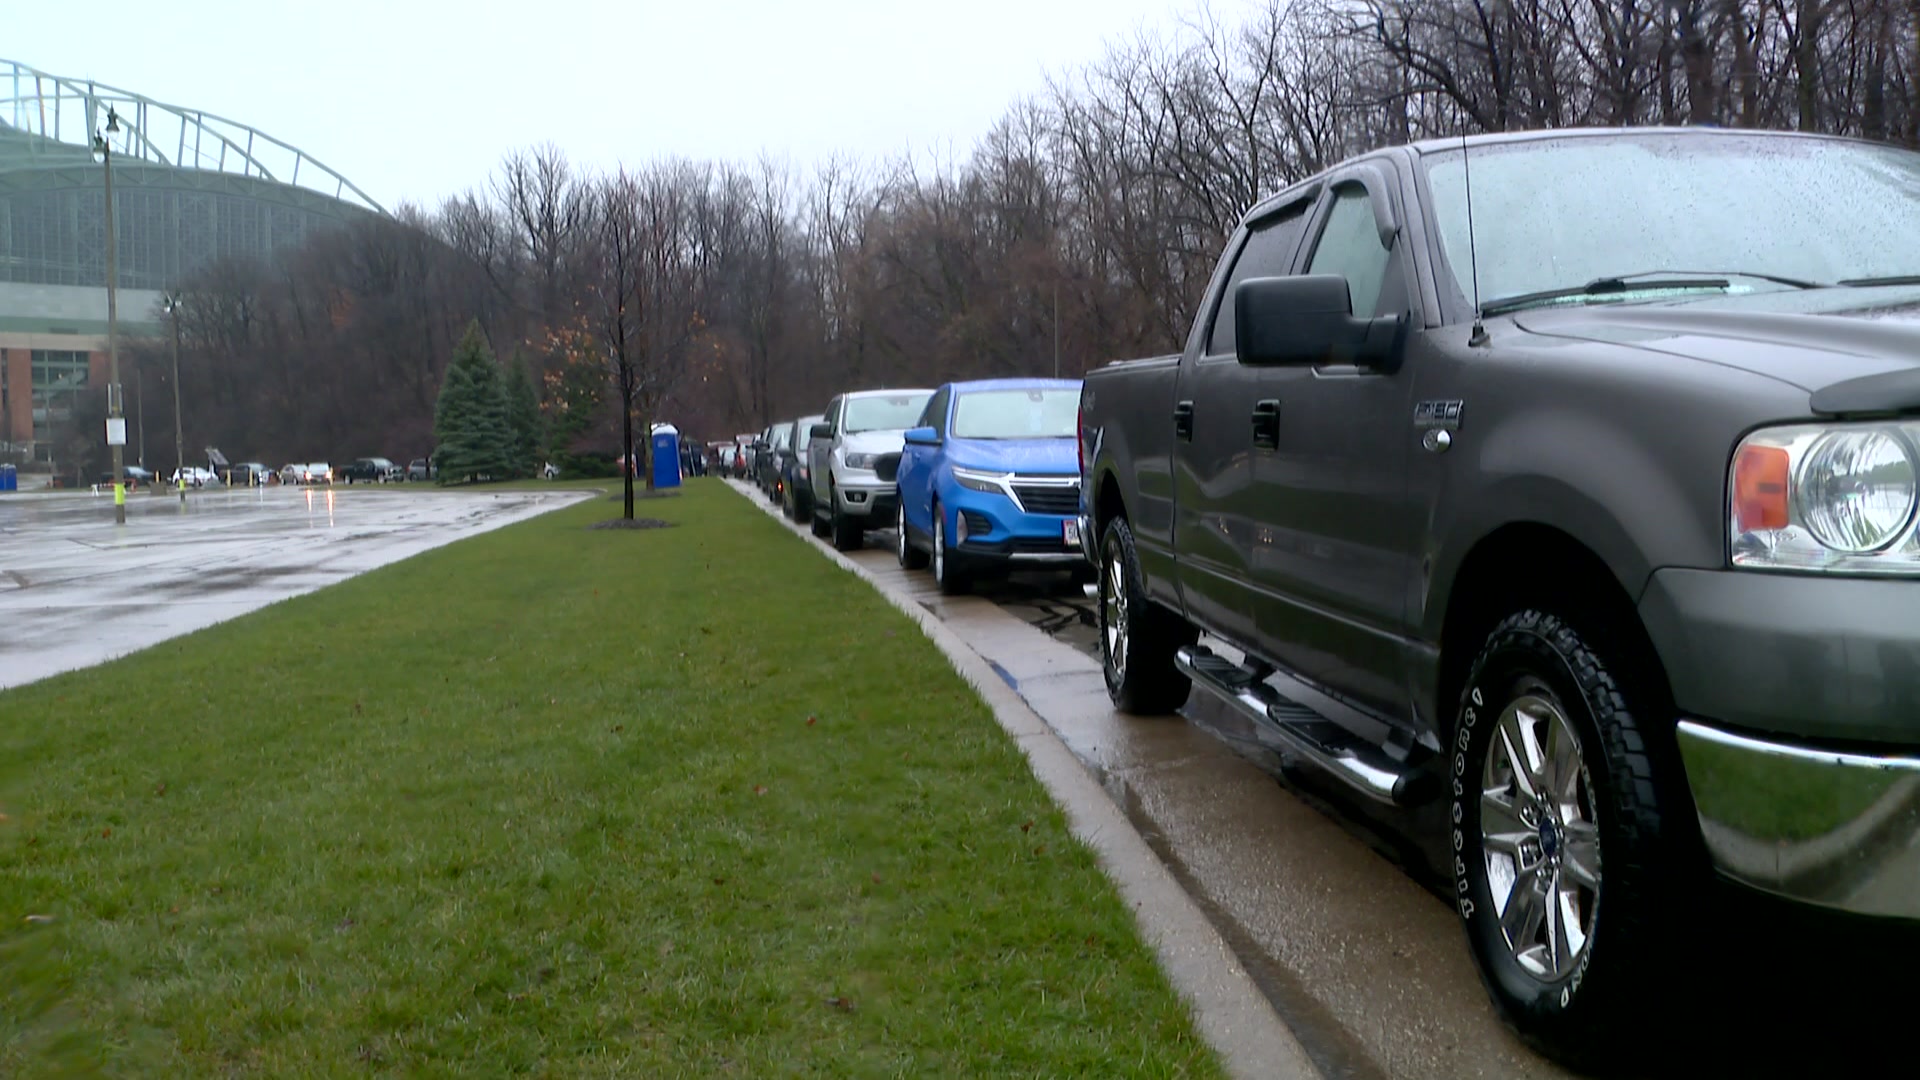 Traditional Parking Method Reinstated at AmFam Field Until New Technology Issues Are Addressed